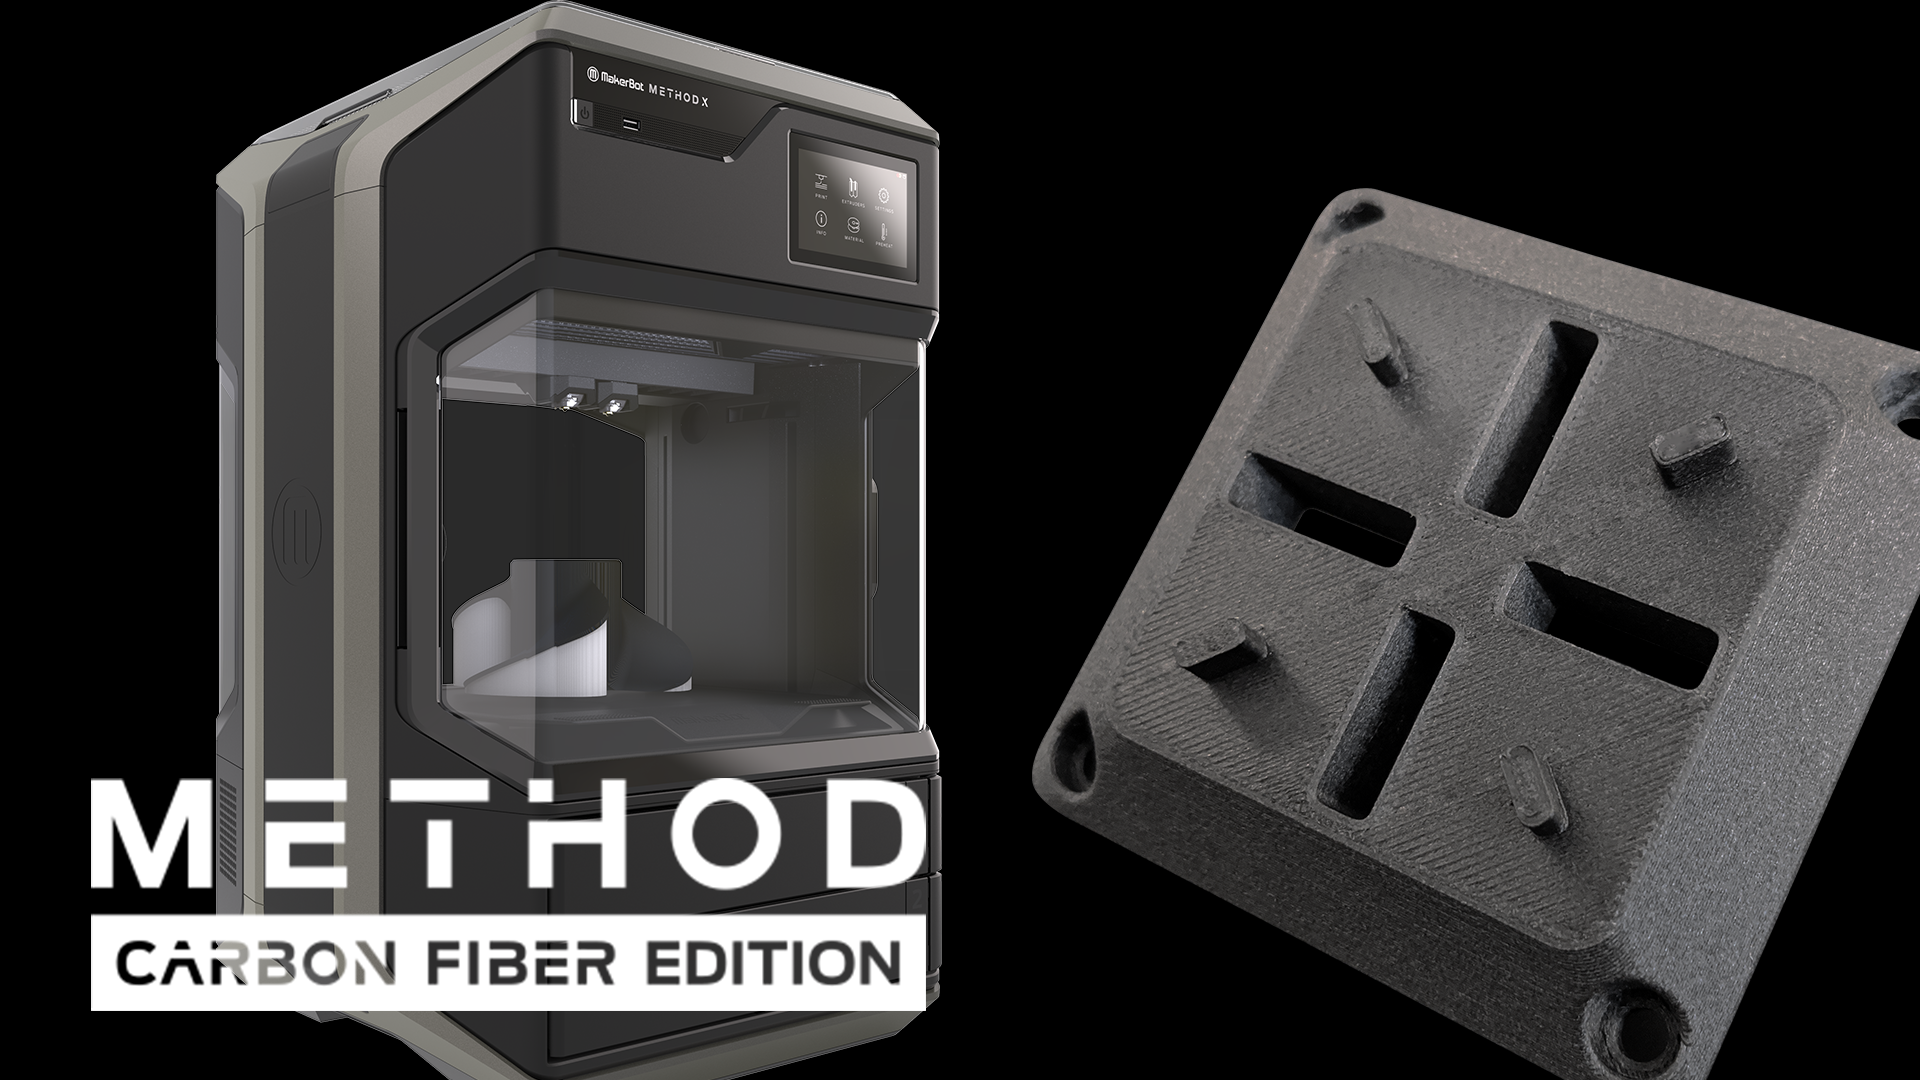 Print carbon fiber reinforced nylon and other engineering-grade composite parts with three dimensional strength and accuracy like never before on METHOD’s unique industrial desktop platform.